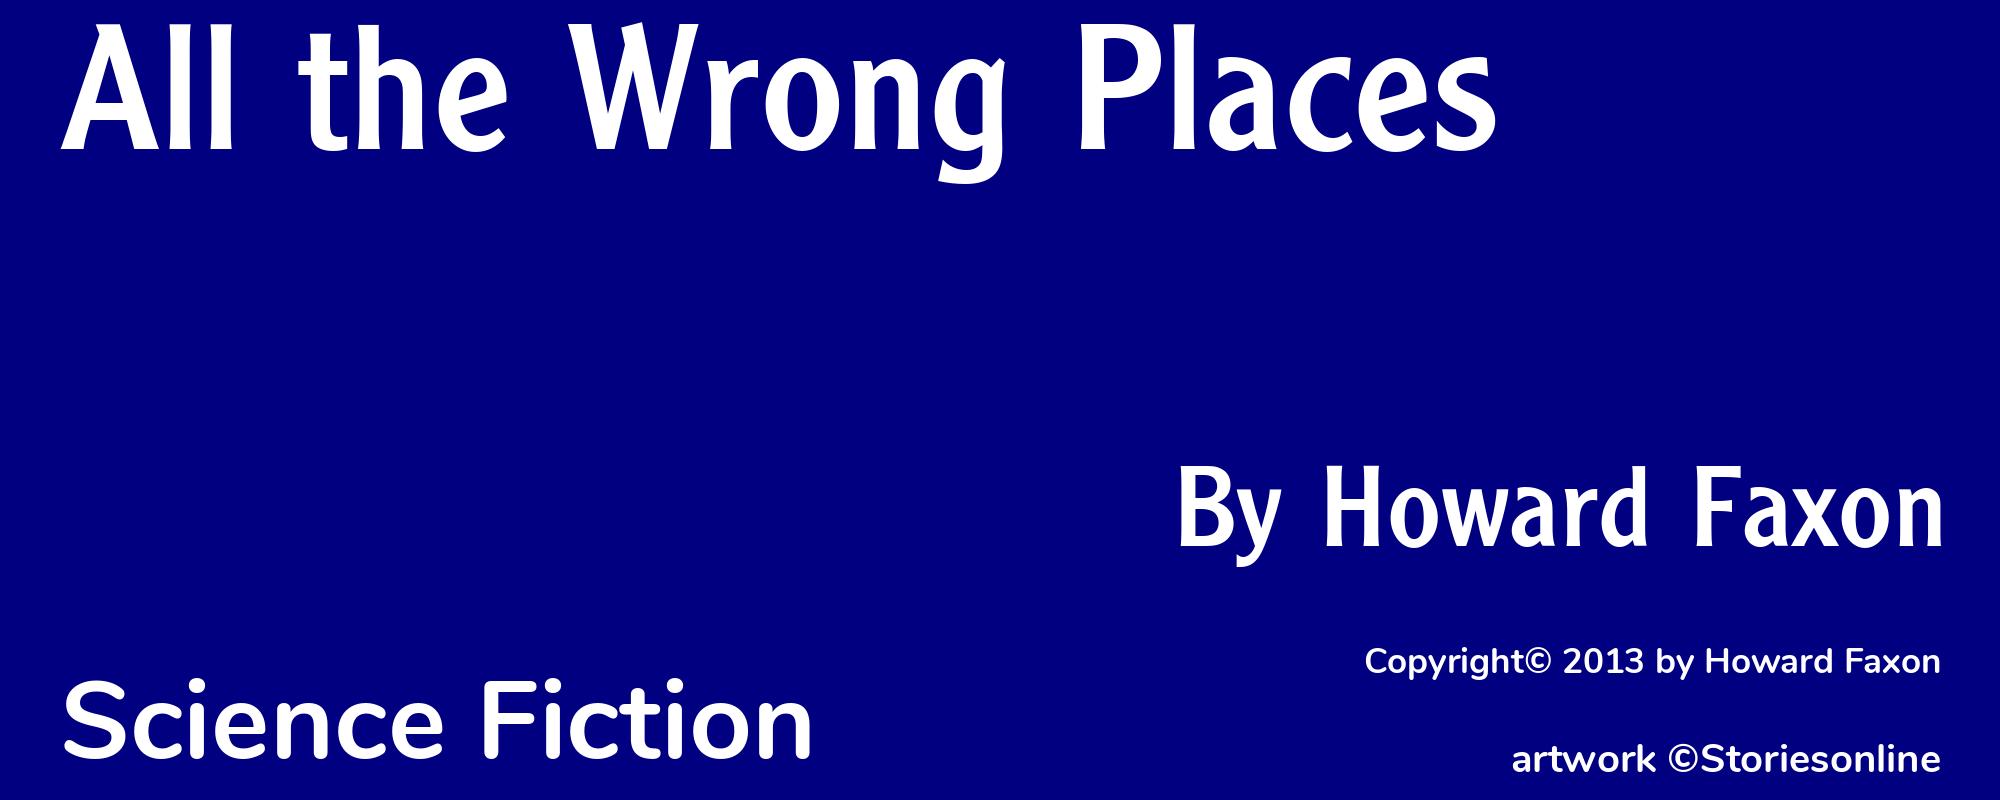 All the Wrong Places - Cover